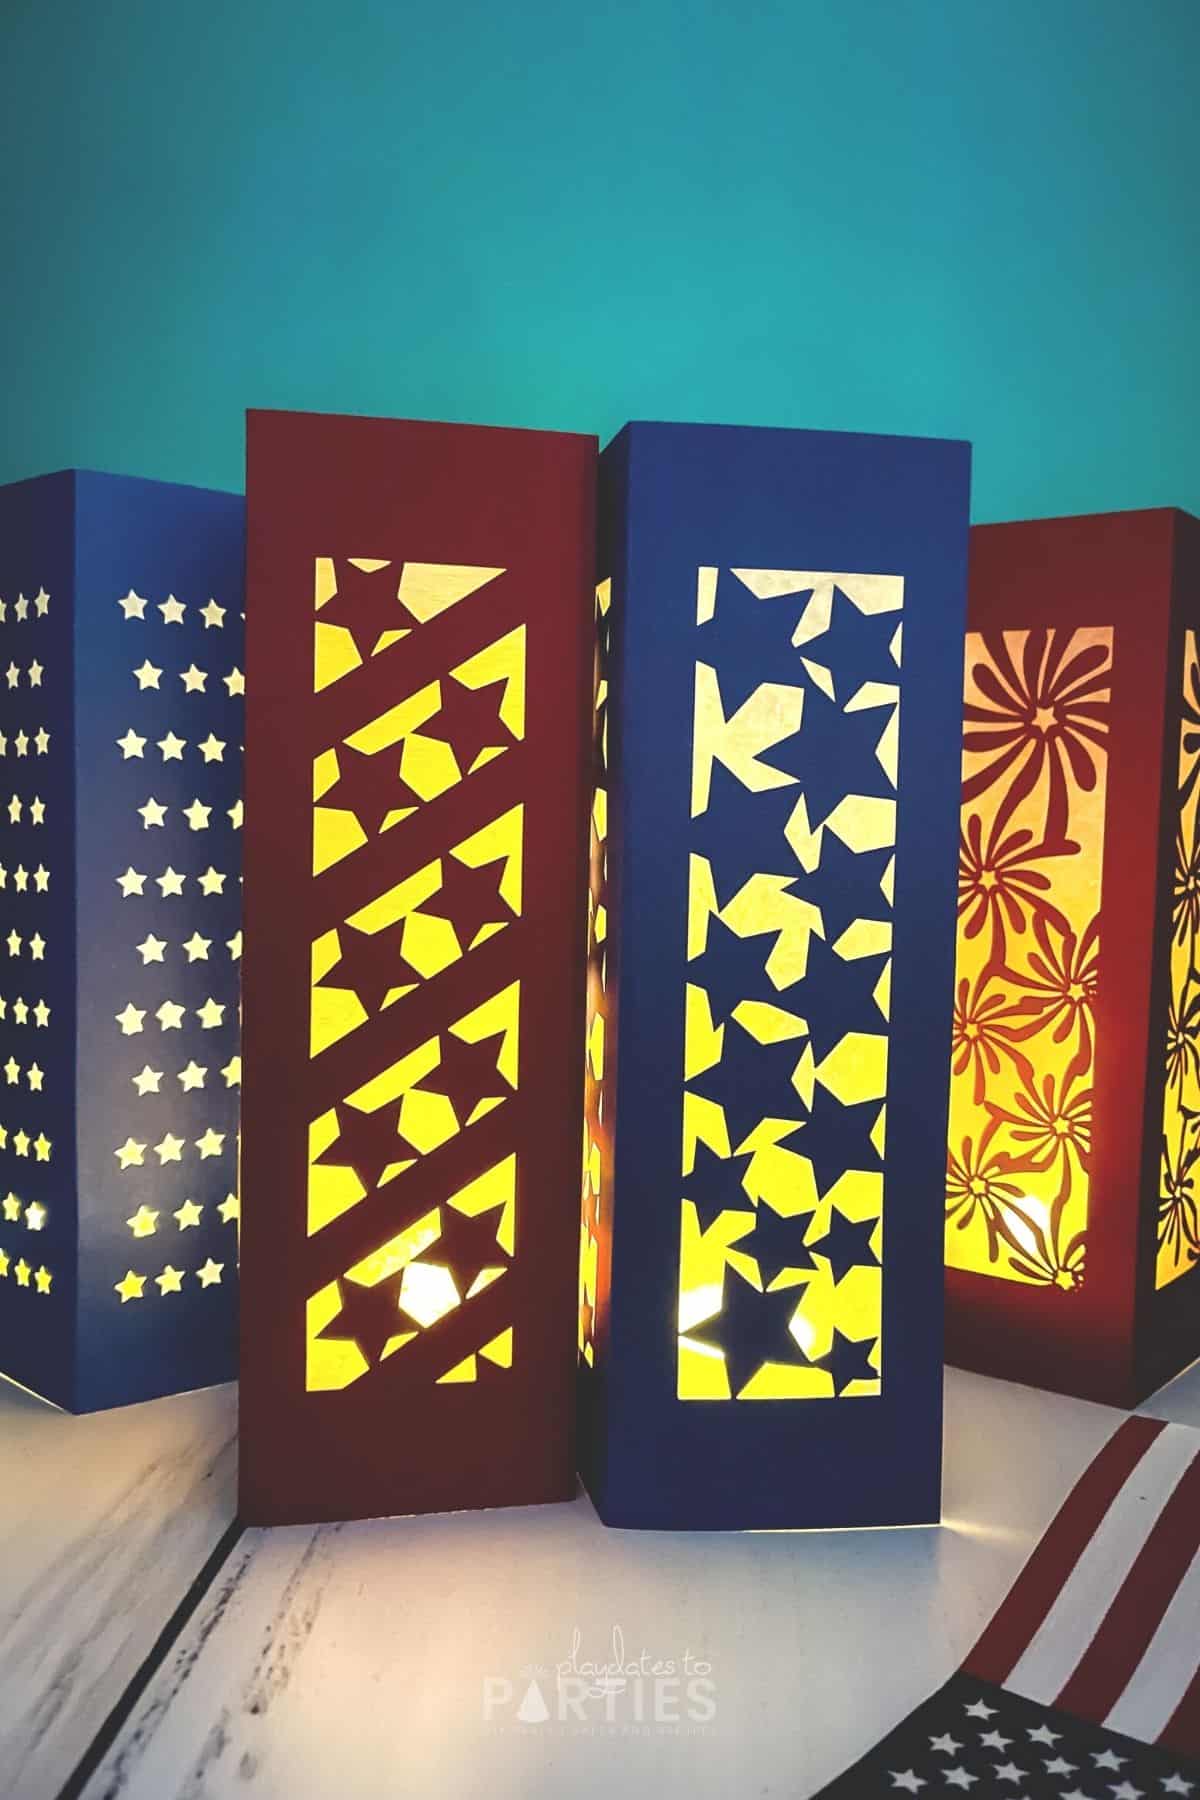 Four patriotic paper lanterns - three with stars designs, and one with fireworks - all glowing in a dark room